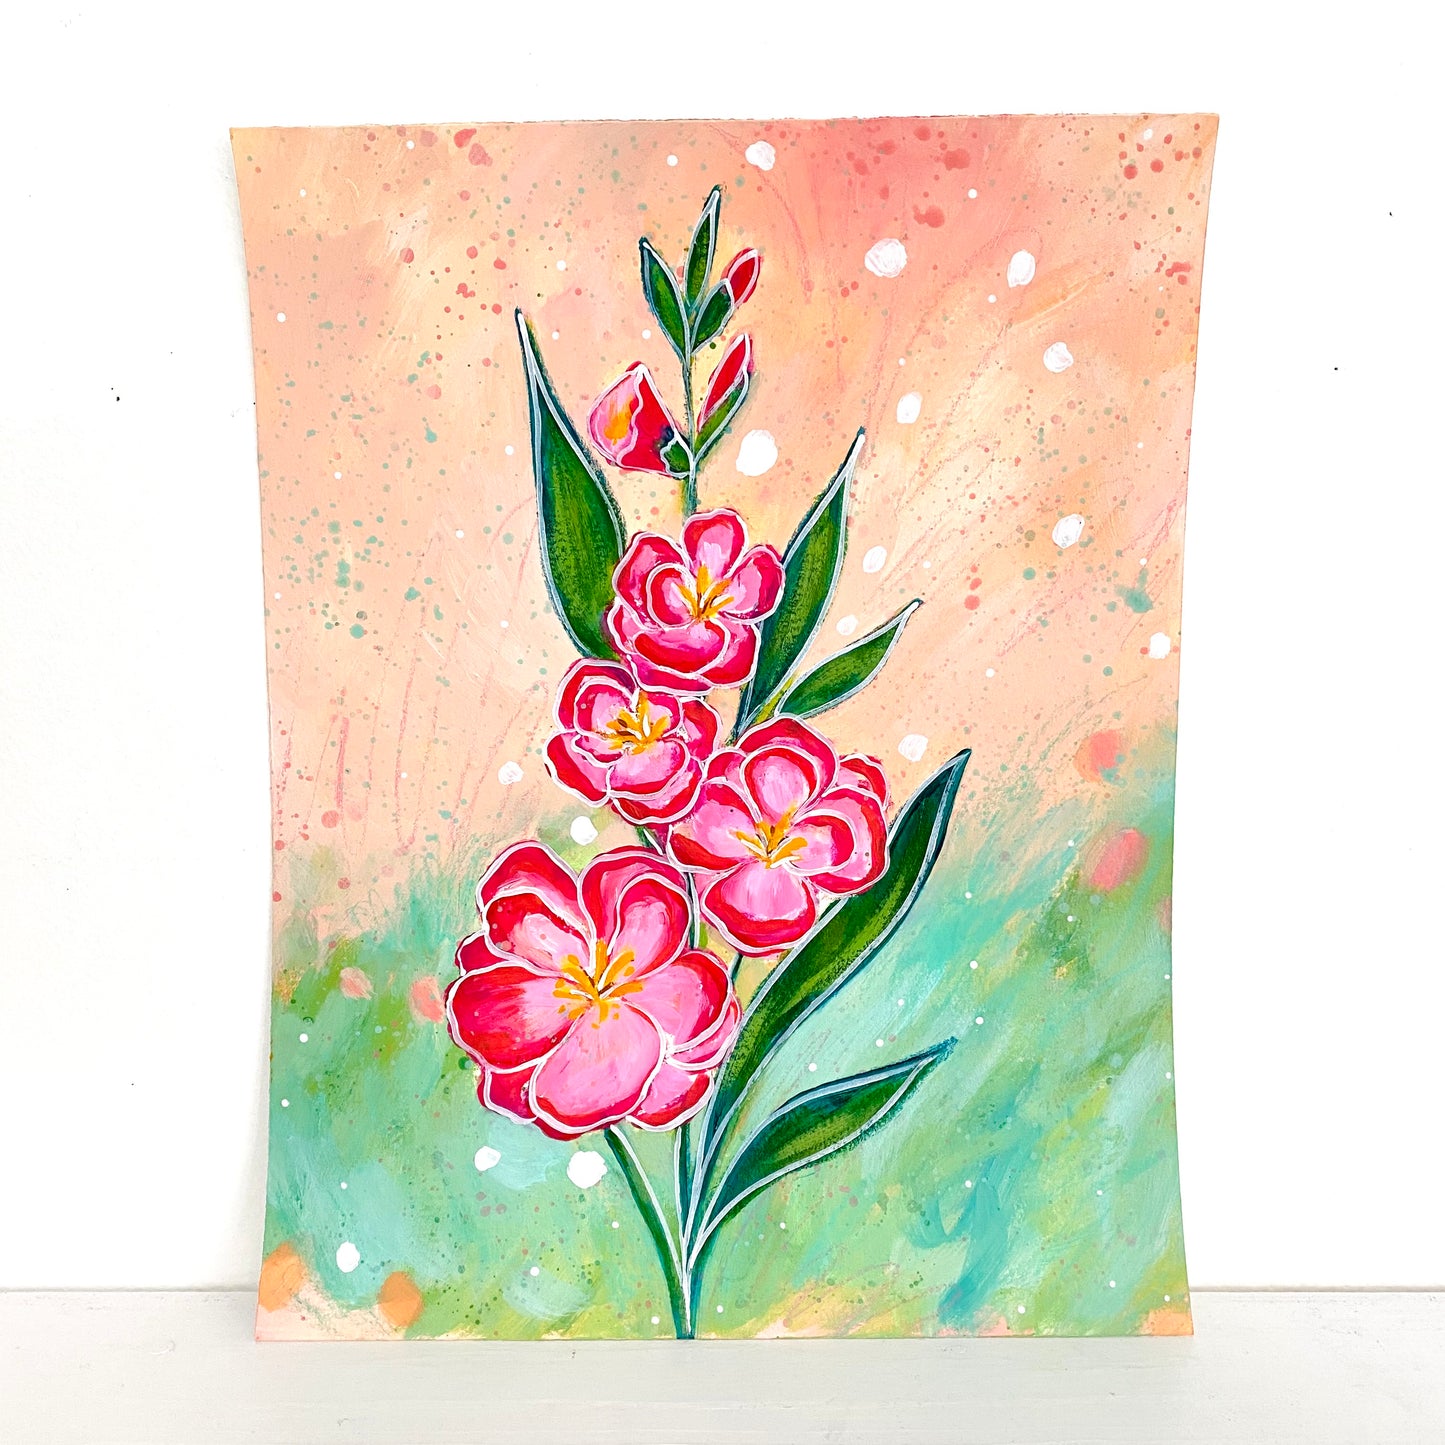 February Flowers Day 4 Gladiolus 8.5x11 inch original painting